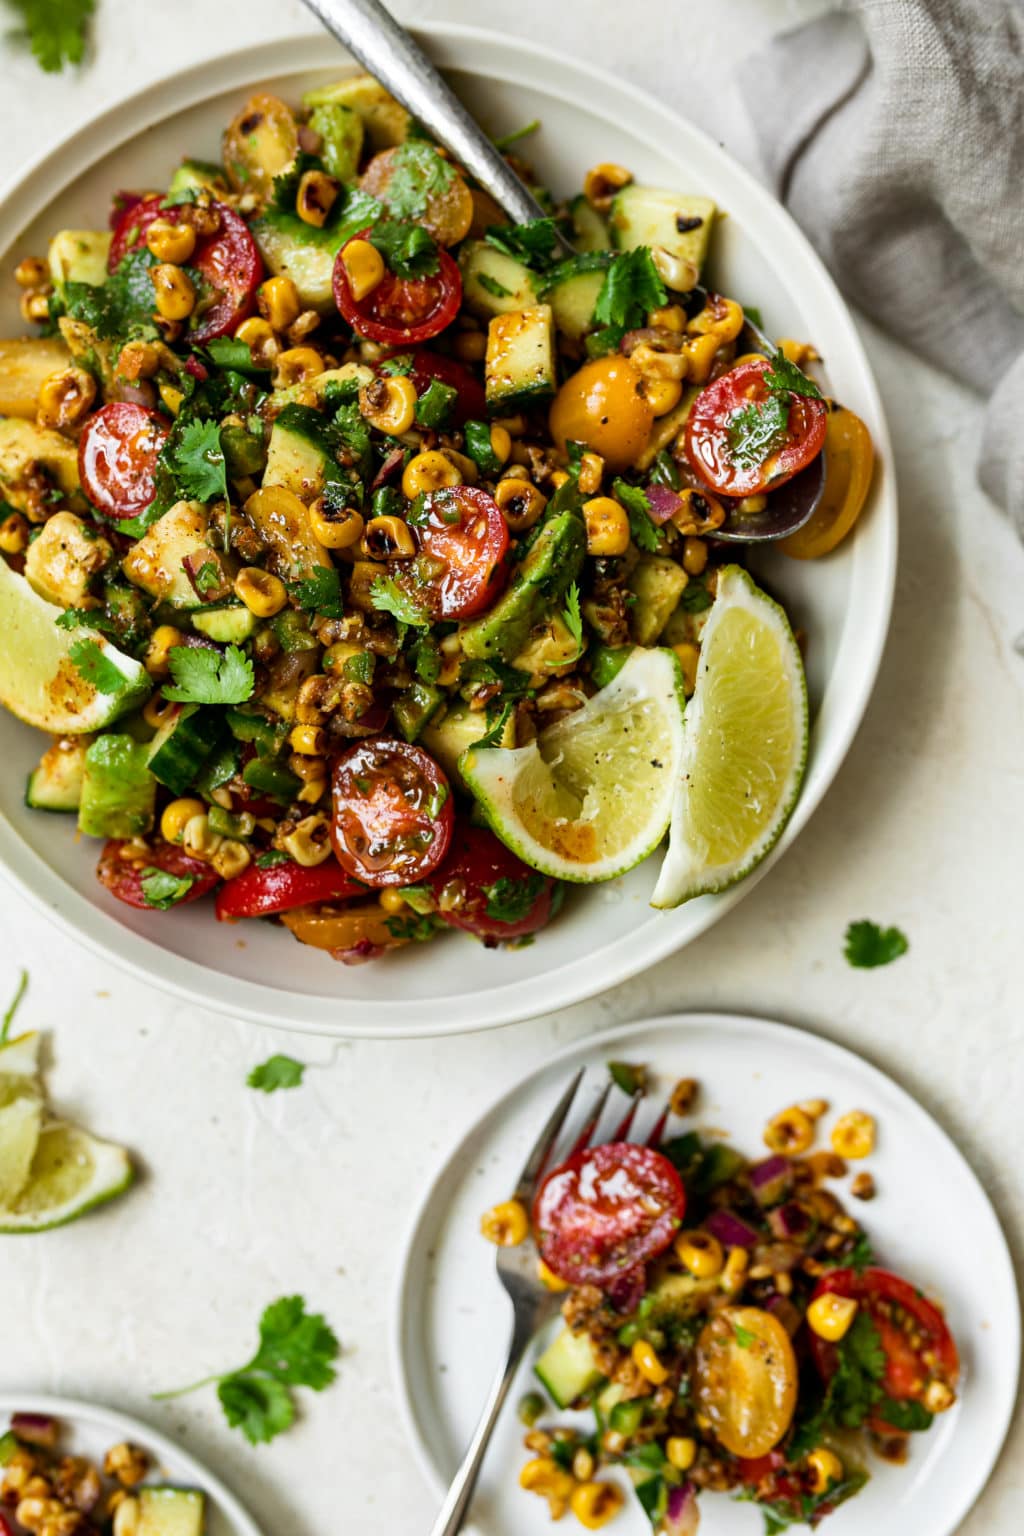 Summer Corn Salad - The Real Food Dietitians